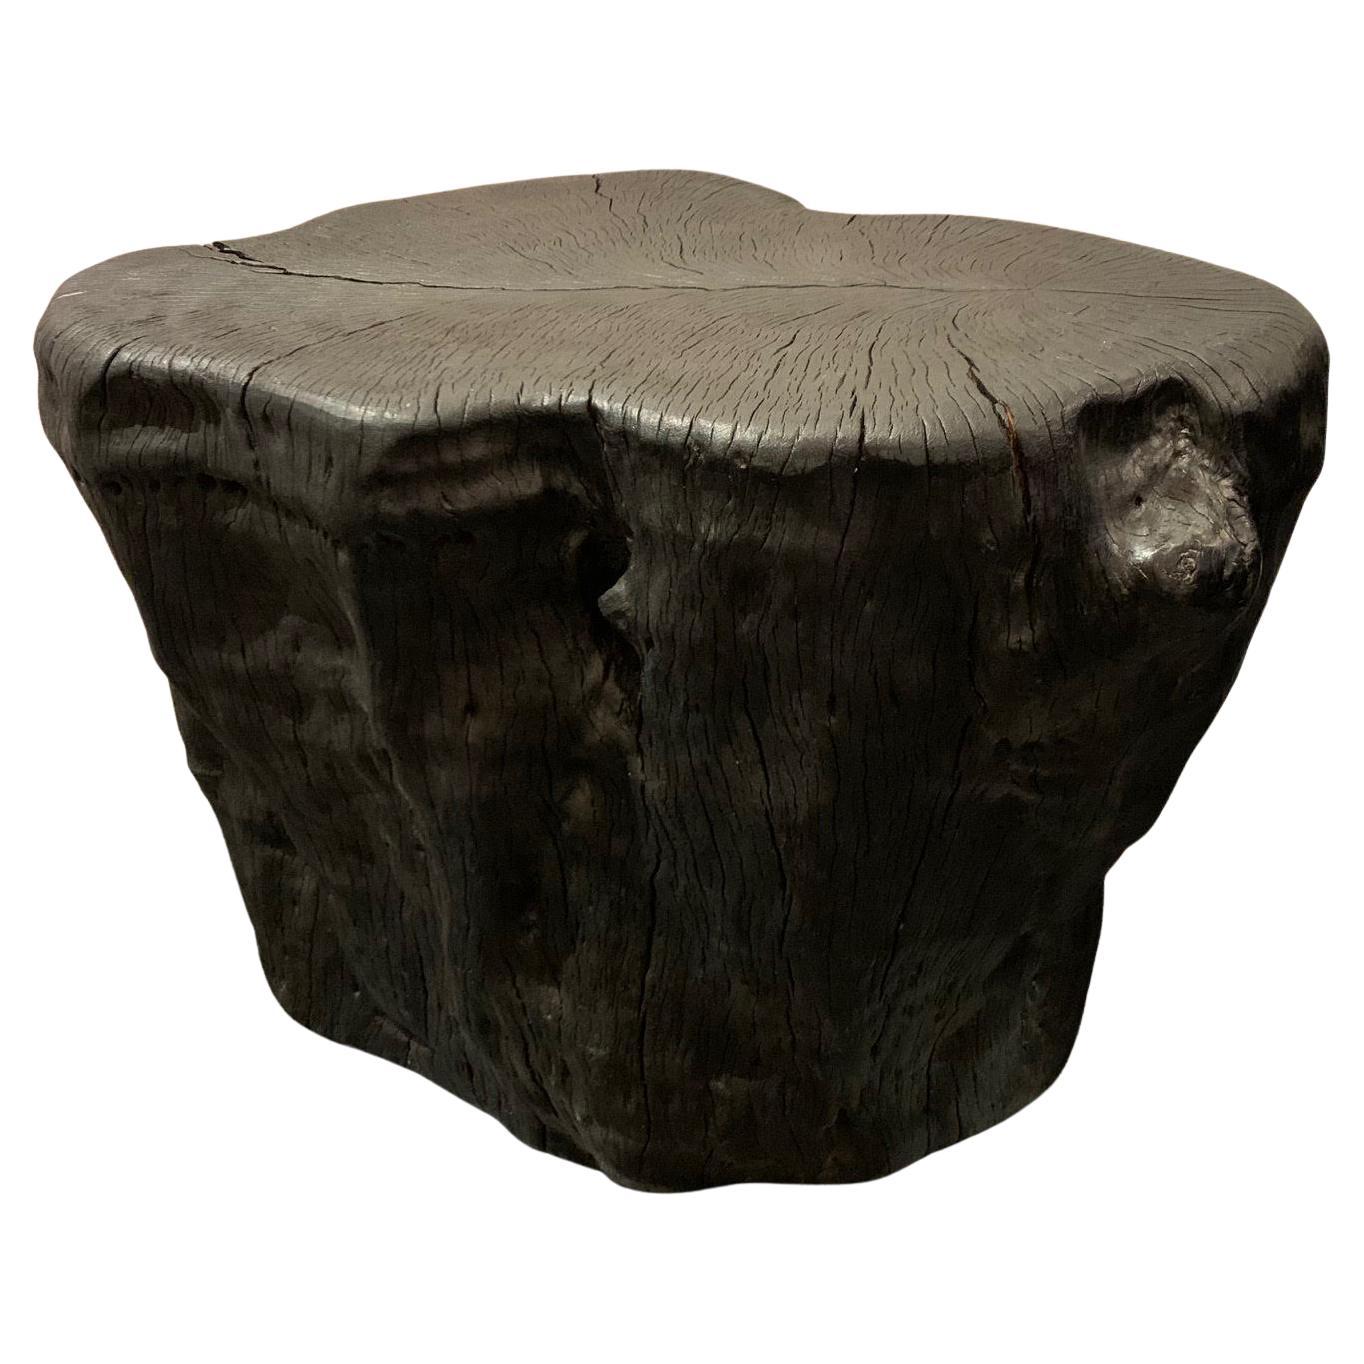 Black Organic Shape Lychee Side Table on Casters, Indonesia, Contemporary